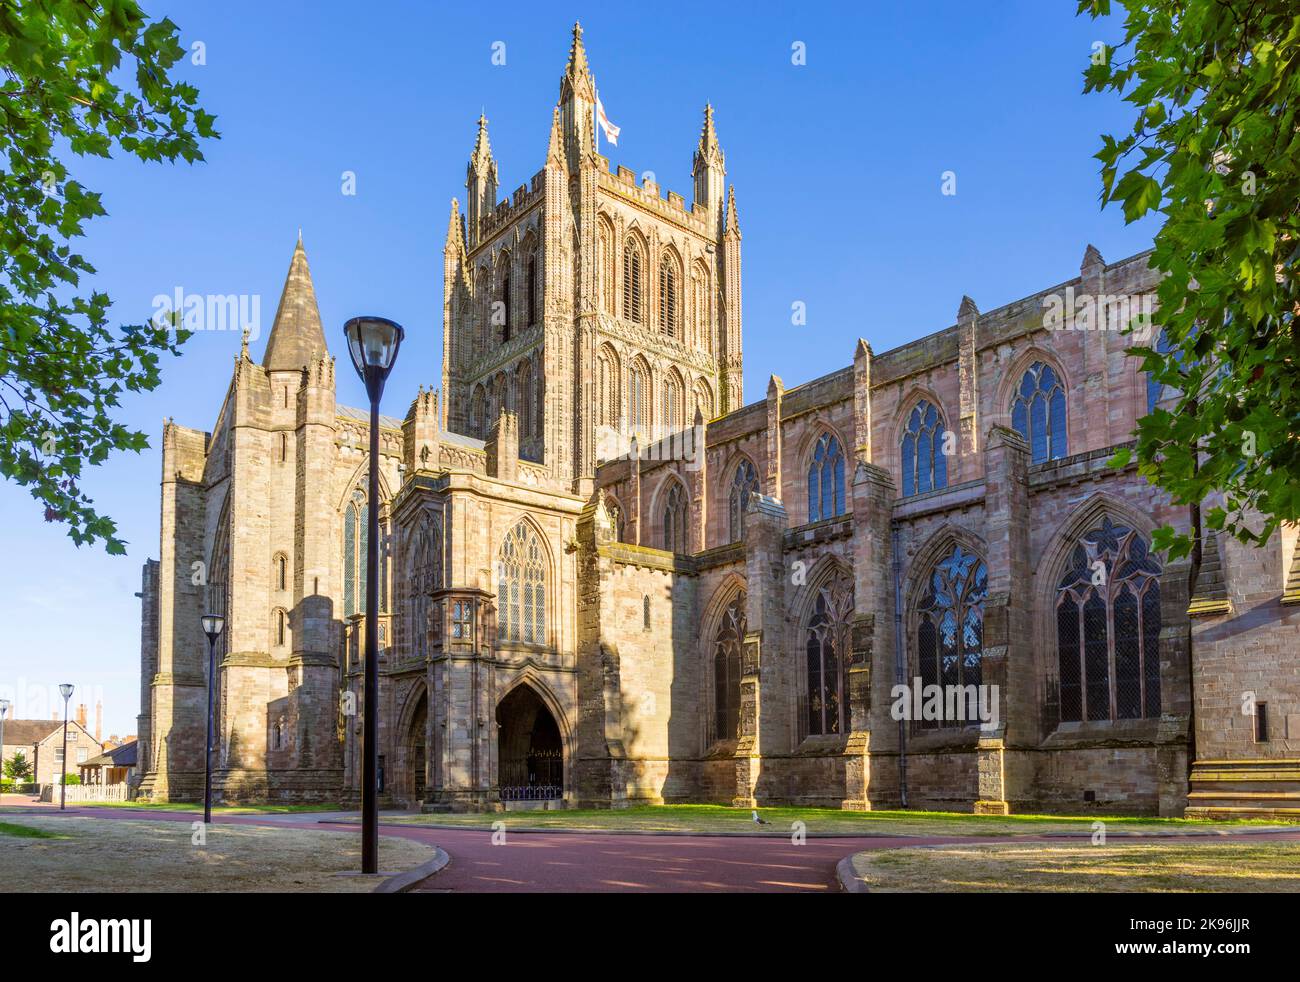 Hereford Cathedral College Cloisters Cathedral Close Hereford Herefordshire England GB Europa Stockfoto